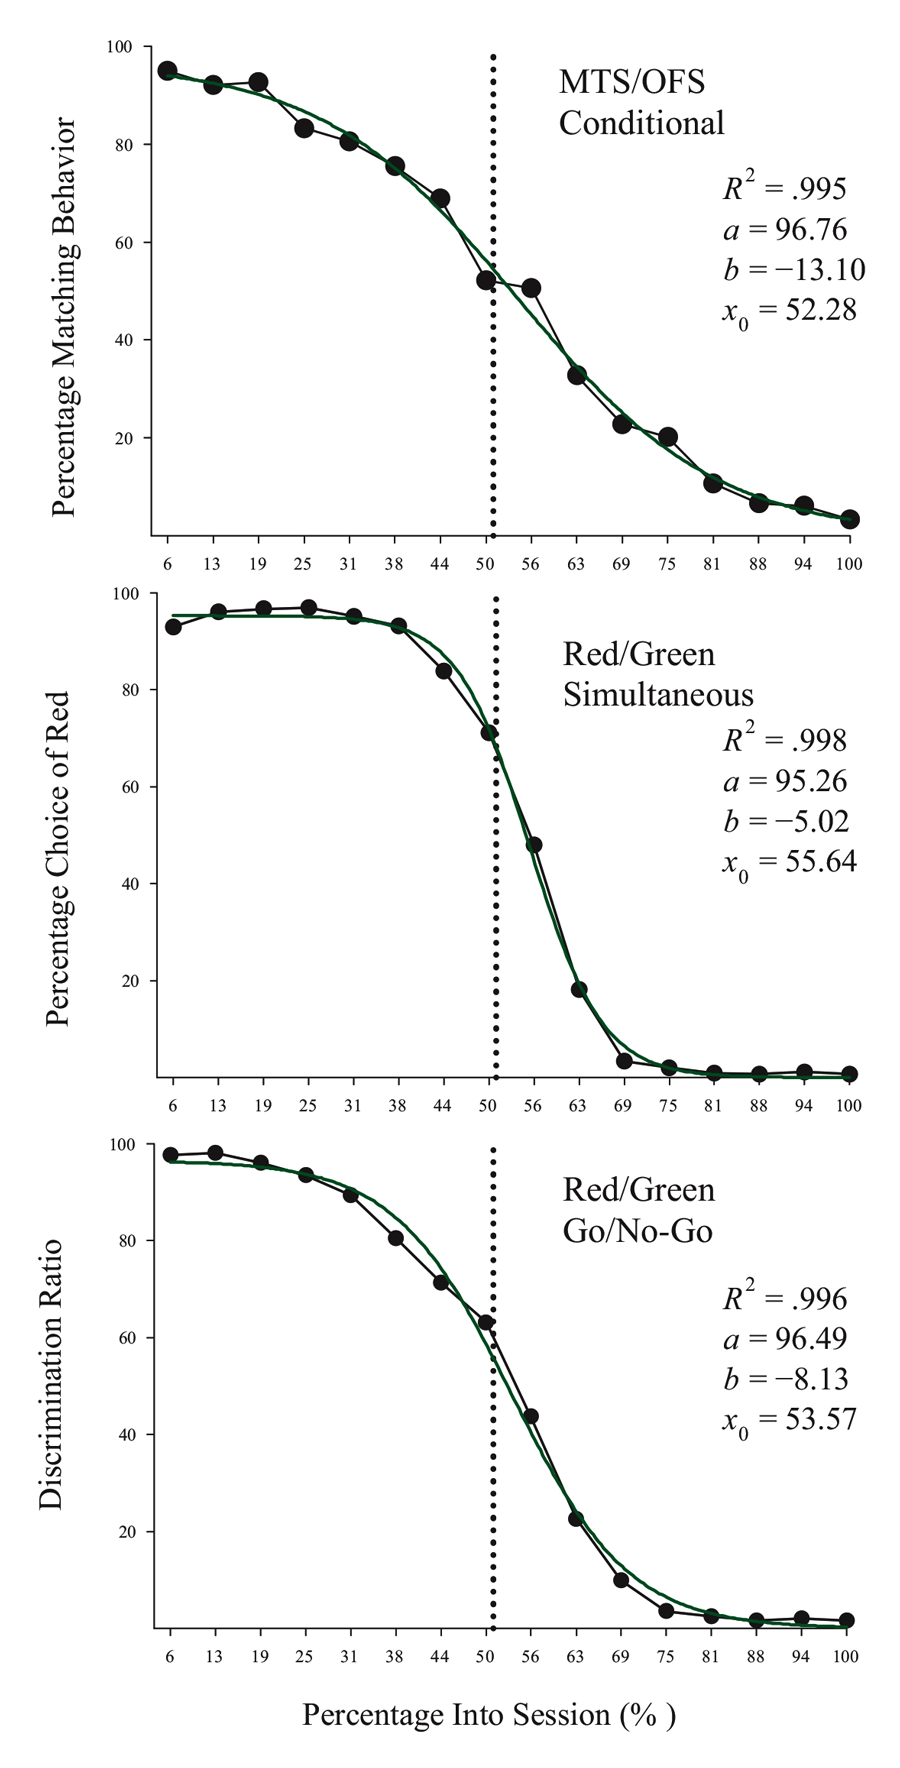 Figure 1. Percentage choice of the first correct stimulus as a function of trial number averaged across pigeons. The top panel is data taken from Cook & Rosen (2010) for four pigeons on a conditional MTS/OFS discrimination. The middle panel is data taken from Rayburn-Reeves, Molet, and Zentall (2011) for 10 pigeons on a simultaneous discrimination. The bottom panel is data taken from McMillan, Sturdy, & Spetch (2015) as a discrimination ratio (Task 1 / (Task 1 + Task 2) for a Go/No-Go procedure. The 3-parameter logistic function (dark green lines) for the fitted data is: f = a ∙ (1 + exp(–(x – x0) ∙ b)).